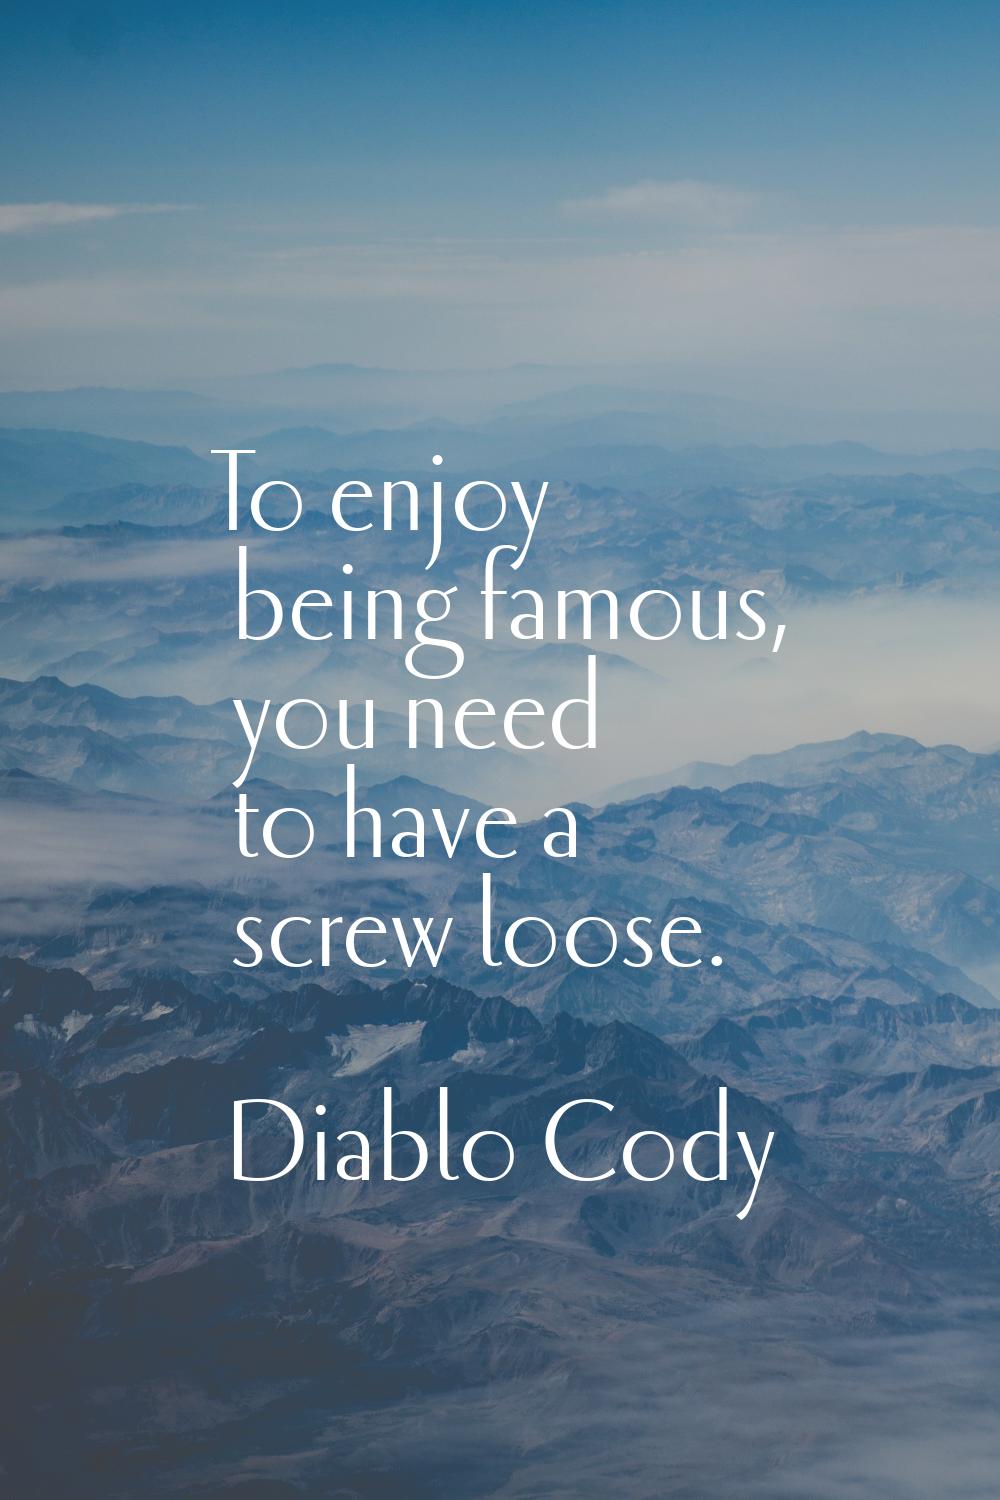 To enjoy being famous, you need to have a screw loose.